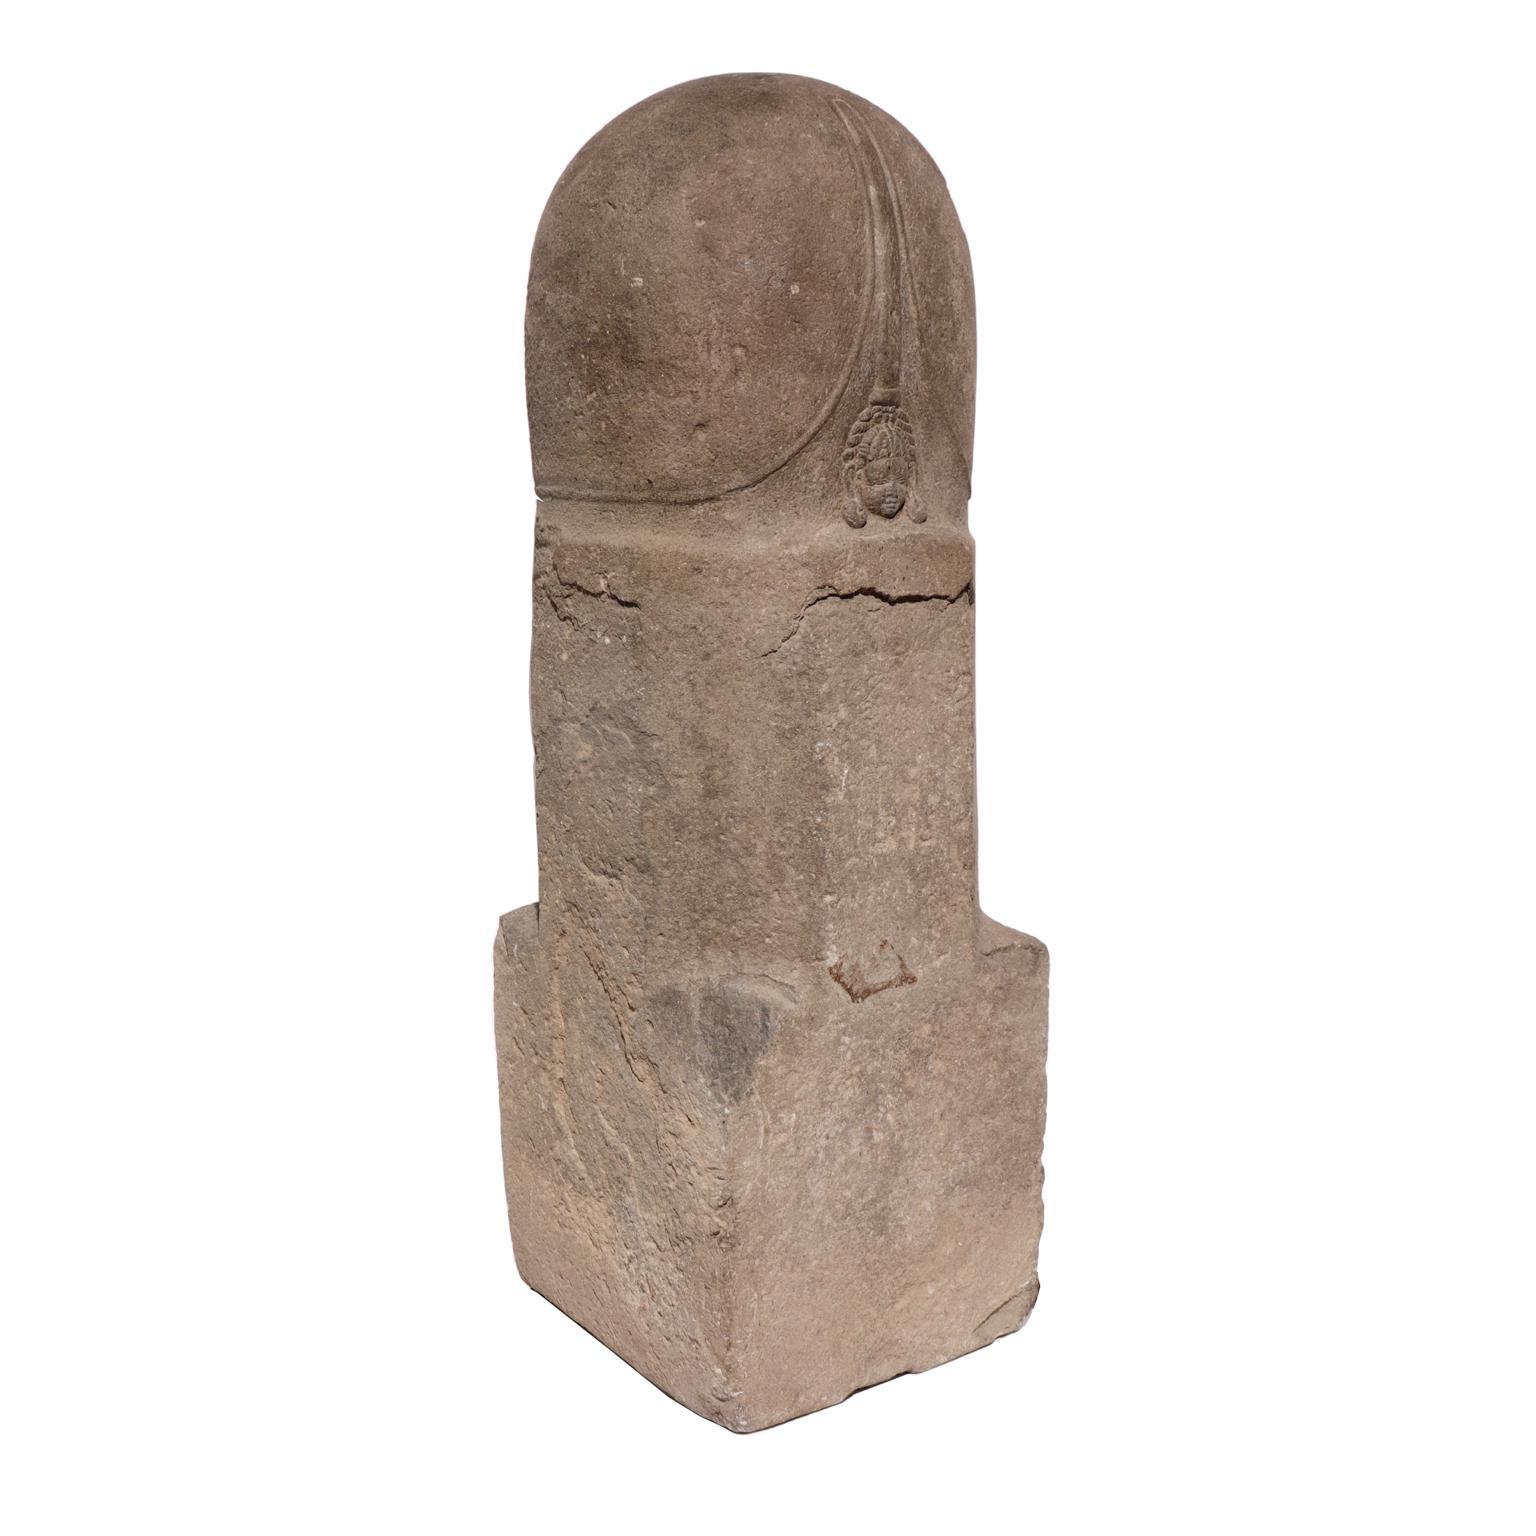 Khmer Mukhalinga, a sandstone sculpture of a Linga fronted with a small relief face of Siva, simple form with square base, octagonal mid-section and cylindrical top representing a phallus, the immaterial form of the supreme deity Siva. 
Pre-Angkor